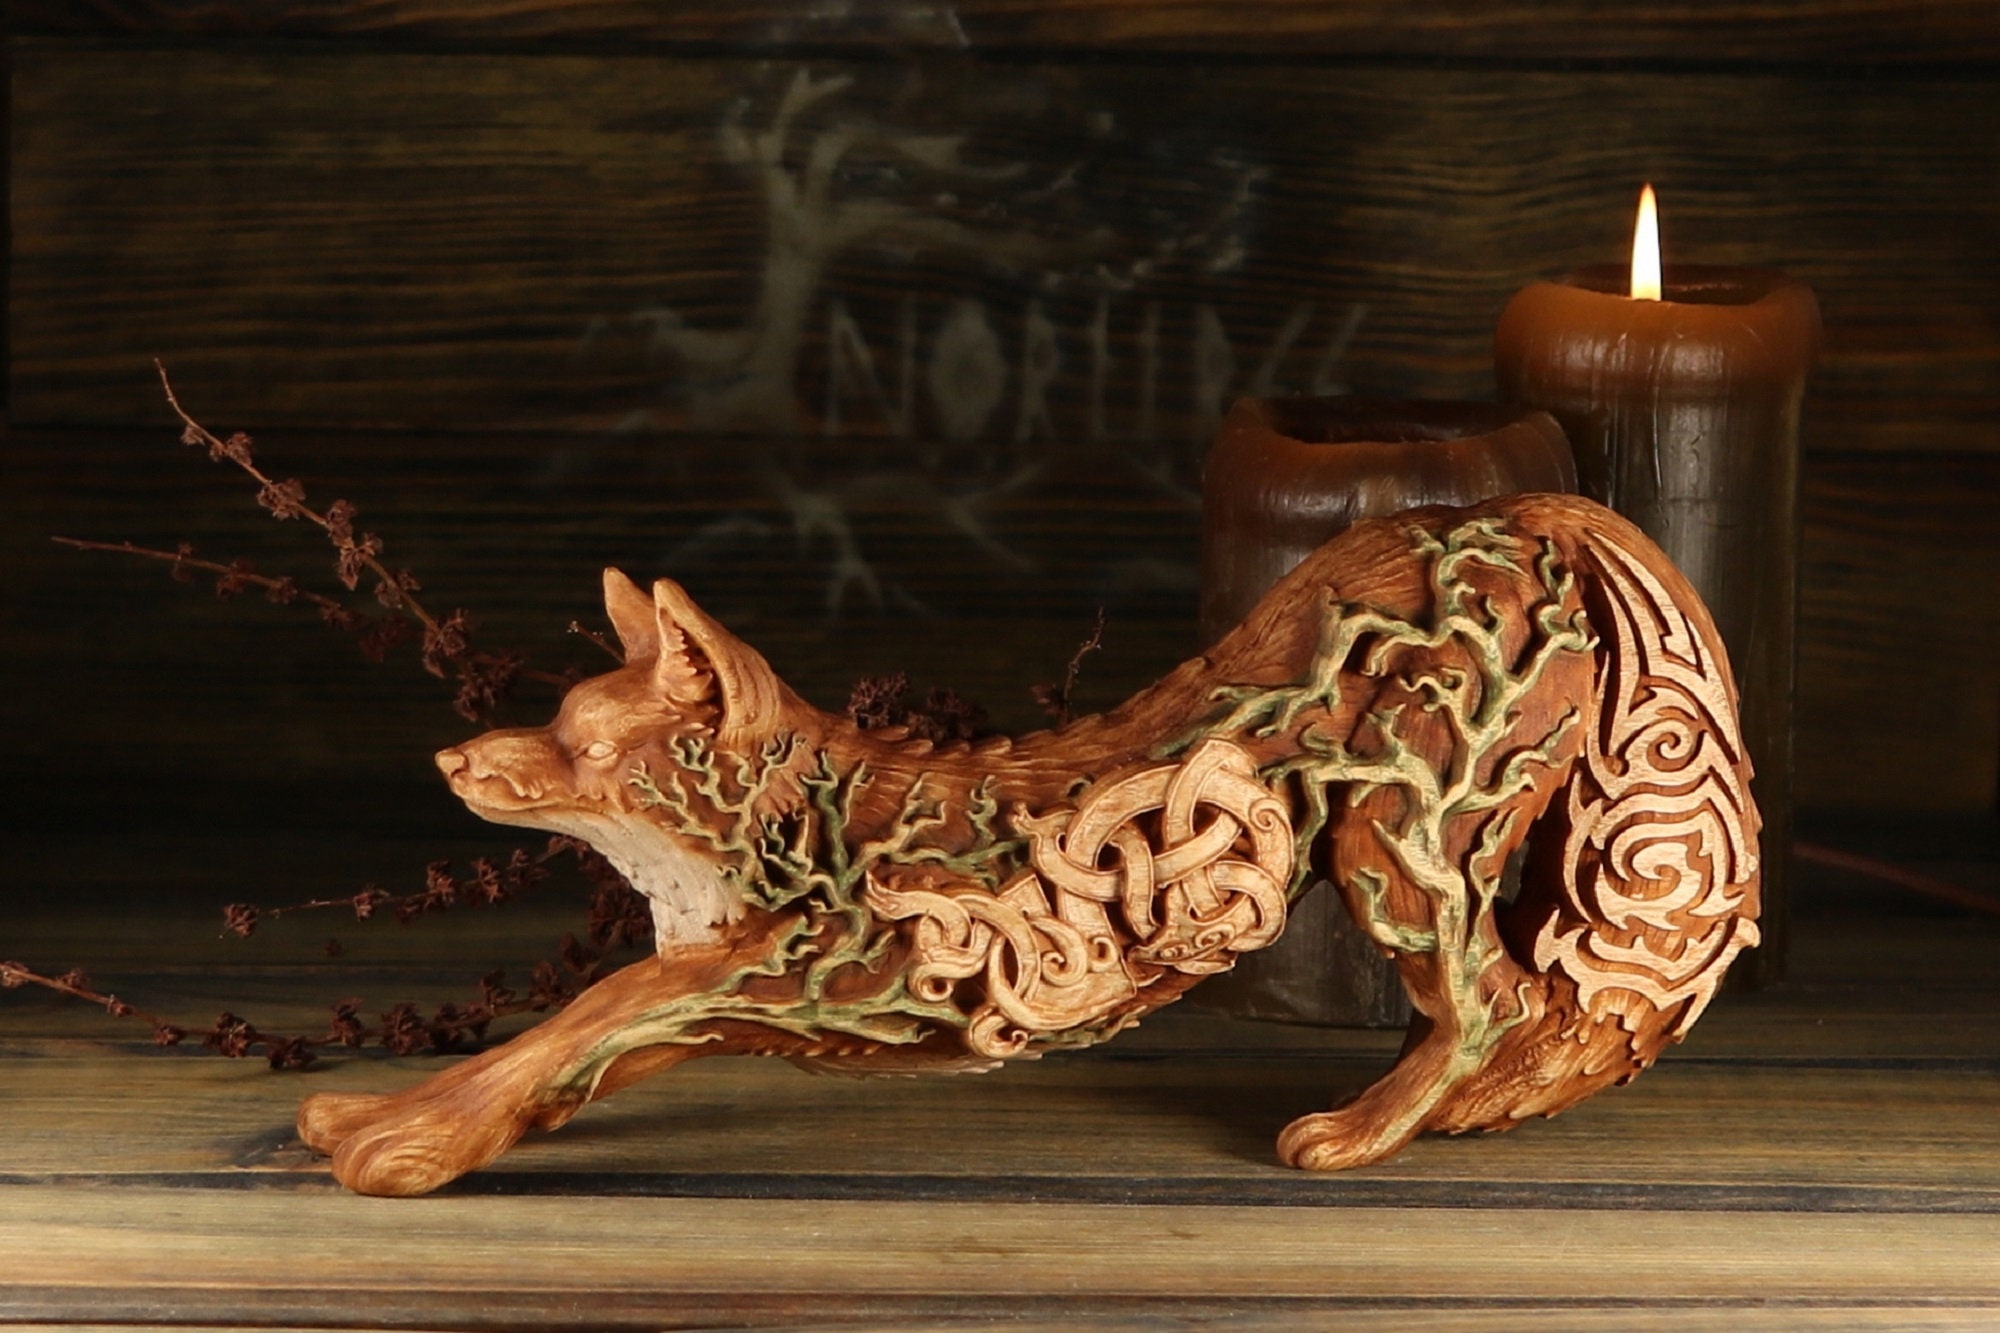 FOX and HARE Graceful Wood Carving Animal Picture. Wild Life Wall